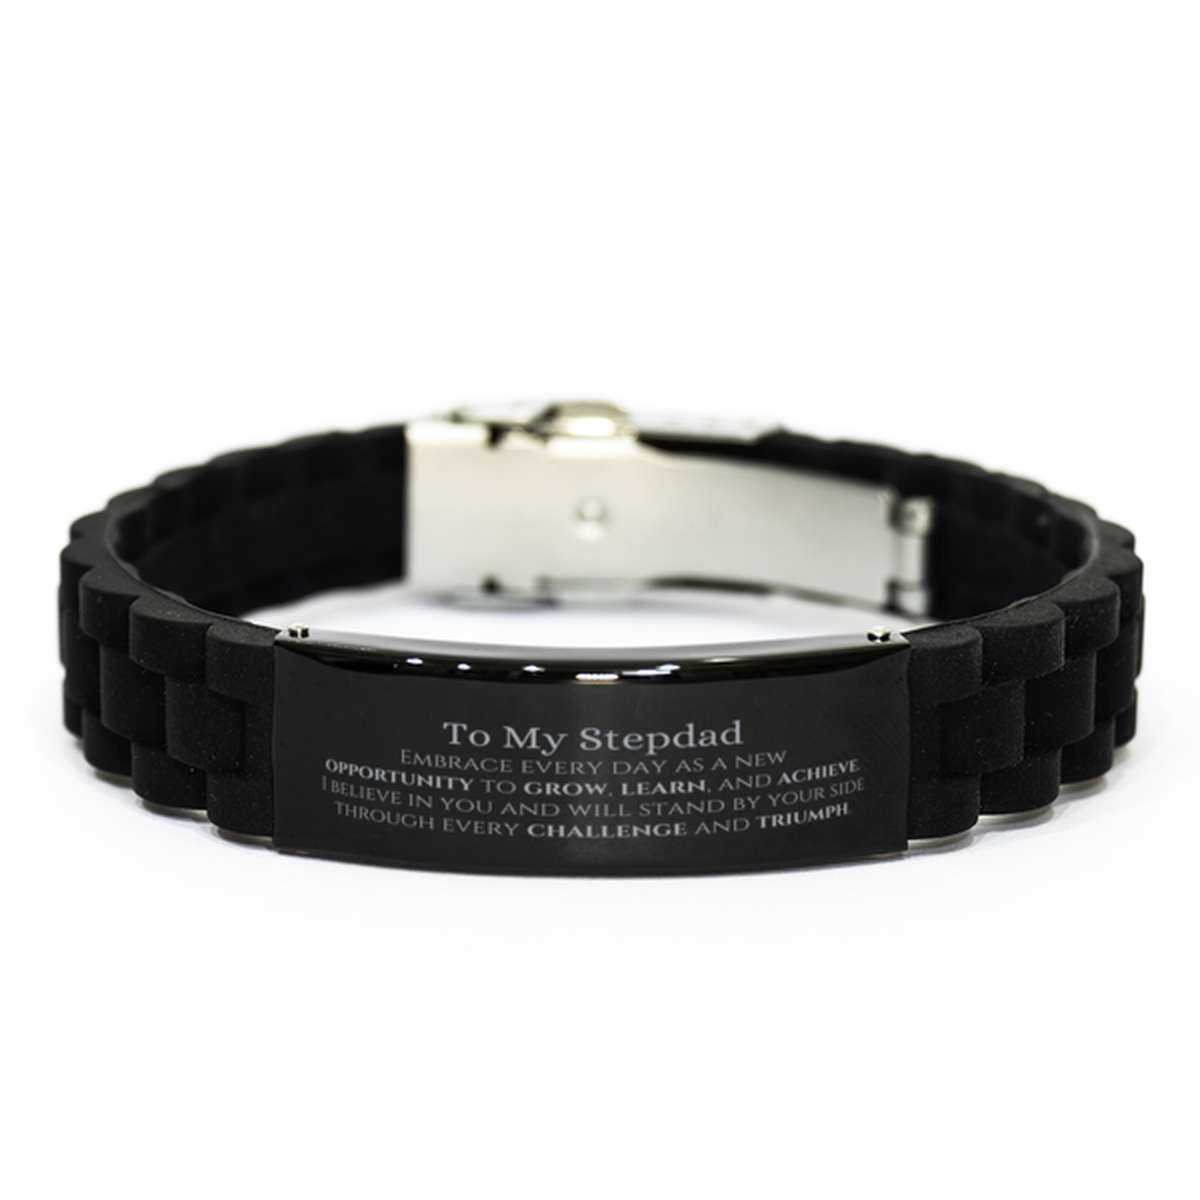 To My Stepdad Gifts, I believe in you and will stand by your side, Inspirational Black Glidelock Clasp Bracelet For Stepdad, Birthday Christmas Motivational Stepdad Gifts